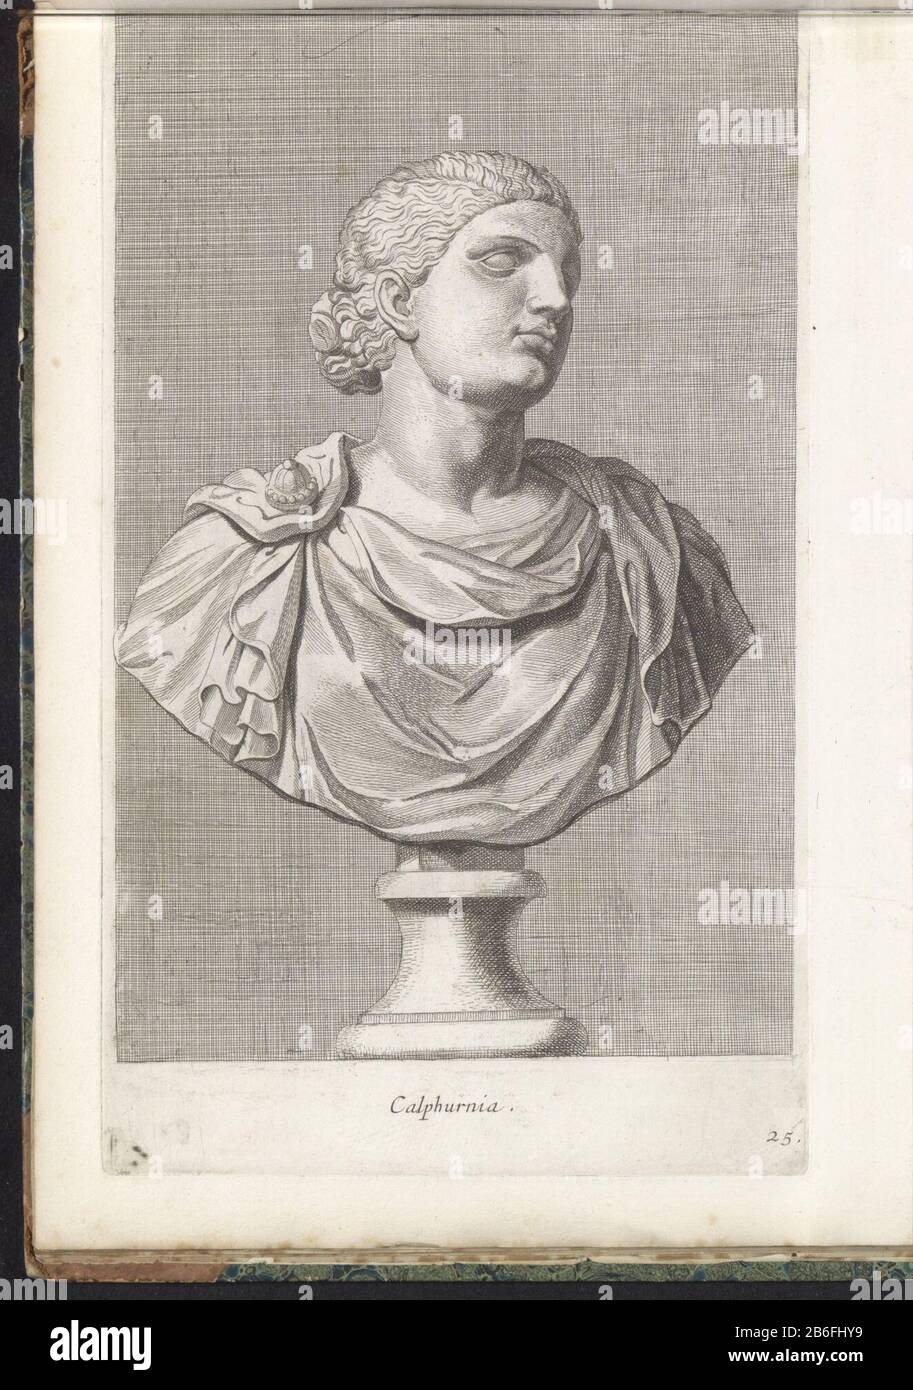 Buste Van Calpumia Piso Calphurnius (op title object) Bust of Calpurnia PisonisCalphurnia (title object) Object type: picture album leaf Serial Number 25 / 98Objectnummer: RP-P-2016-591-52-1 Inscriptions / Brands: number, right recto handwritten '52' (Numbering of the album pages 34 t / m 88 by Michiel Hinloopen) Description: Classic bust of a woman. The print is part of an album with a series of prints to sculptures in the collection of Gerard Reynst. Manufacturer : printmaker: Hubert Quellinusprentmaker: Gerard de Lairesse (rejected attribution) Place manufacture: Antwerp Date: 1646 - 1670 P Stock Photo